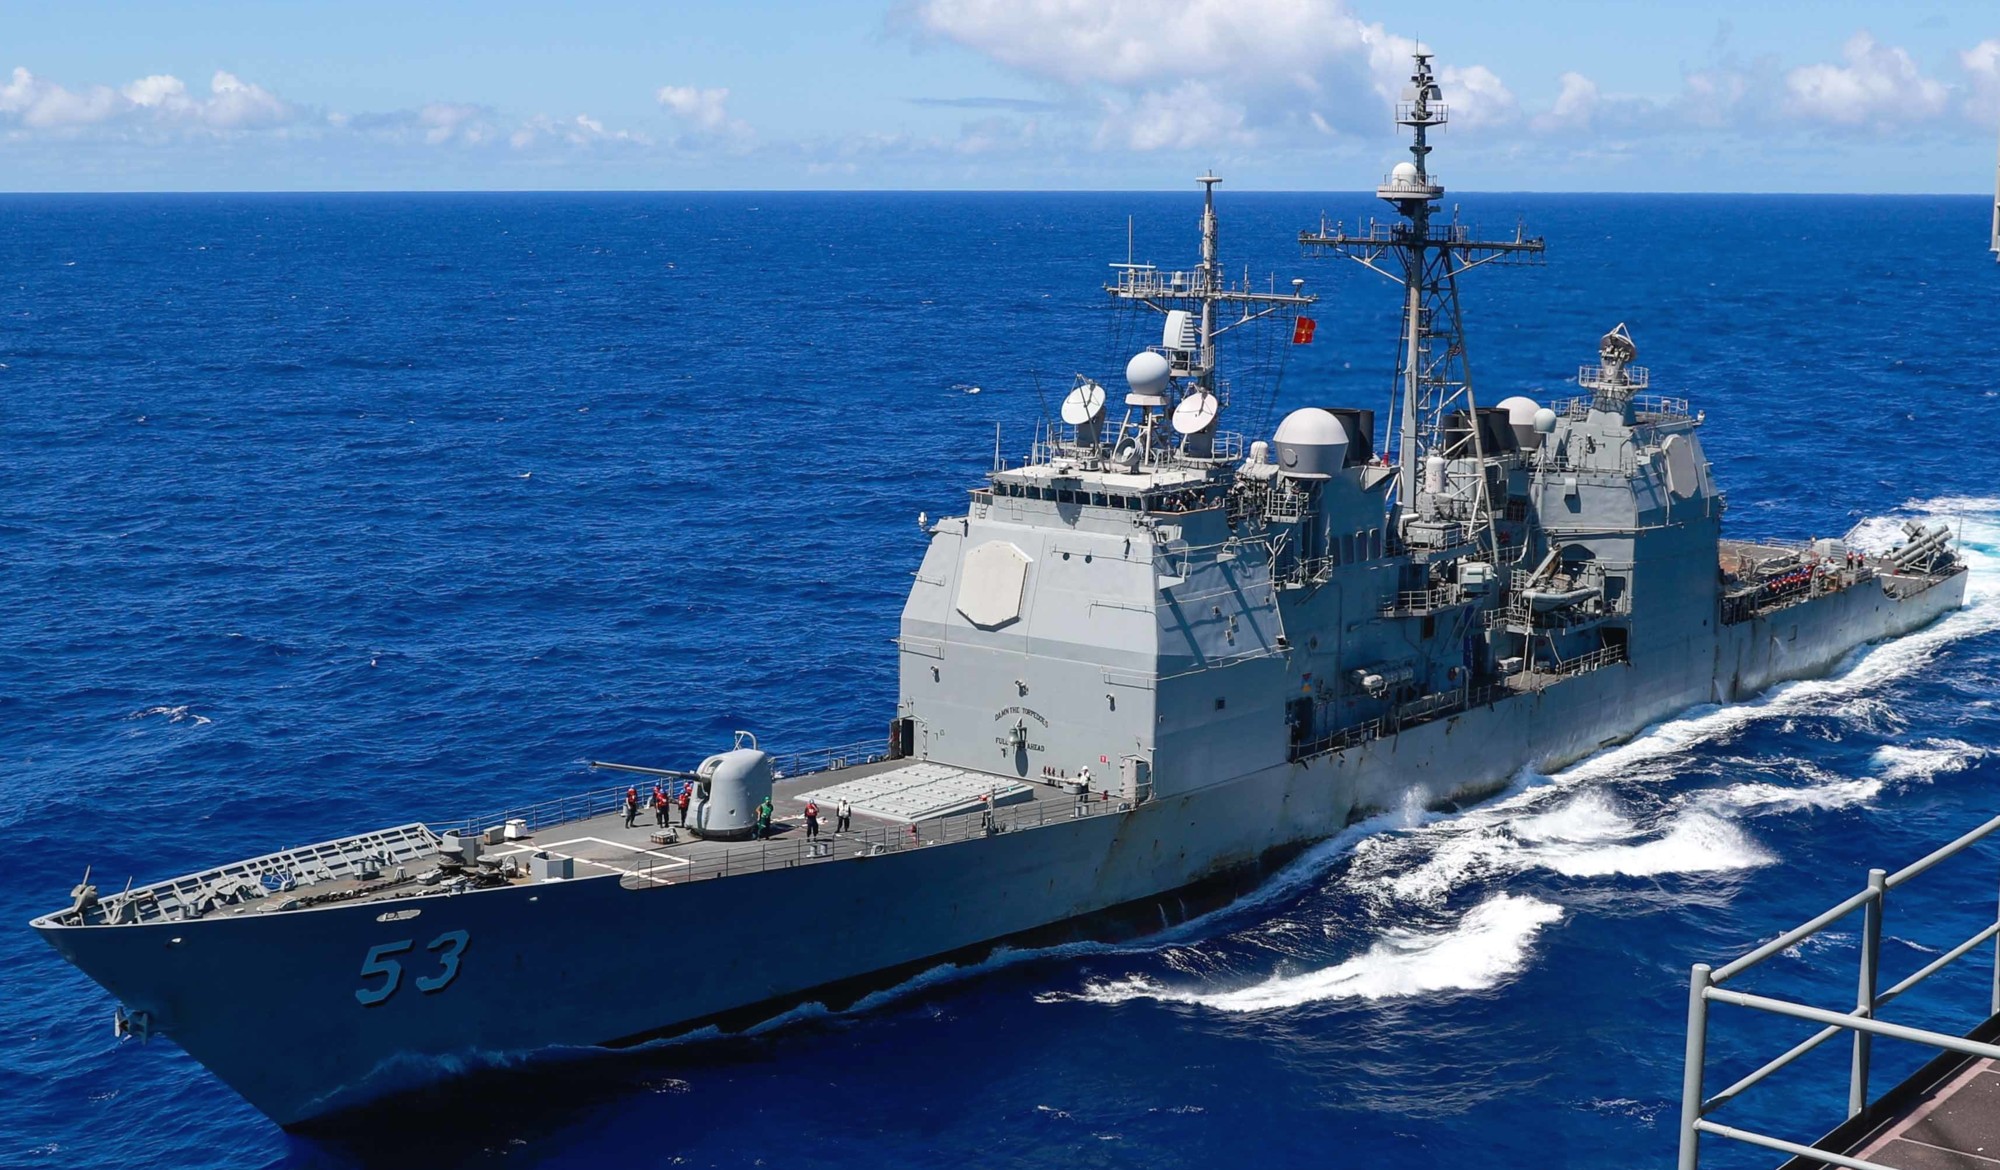 cg-53 uss mobile bay ticonderoga class guided missile cruiser aegis us navy 148